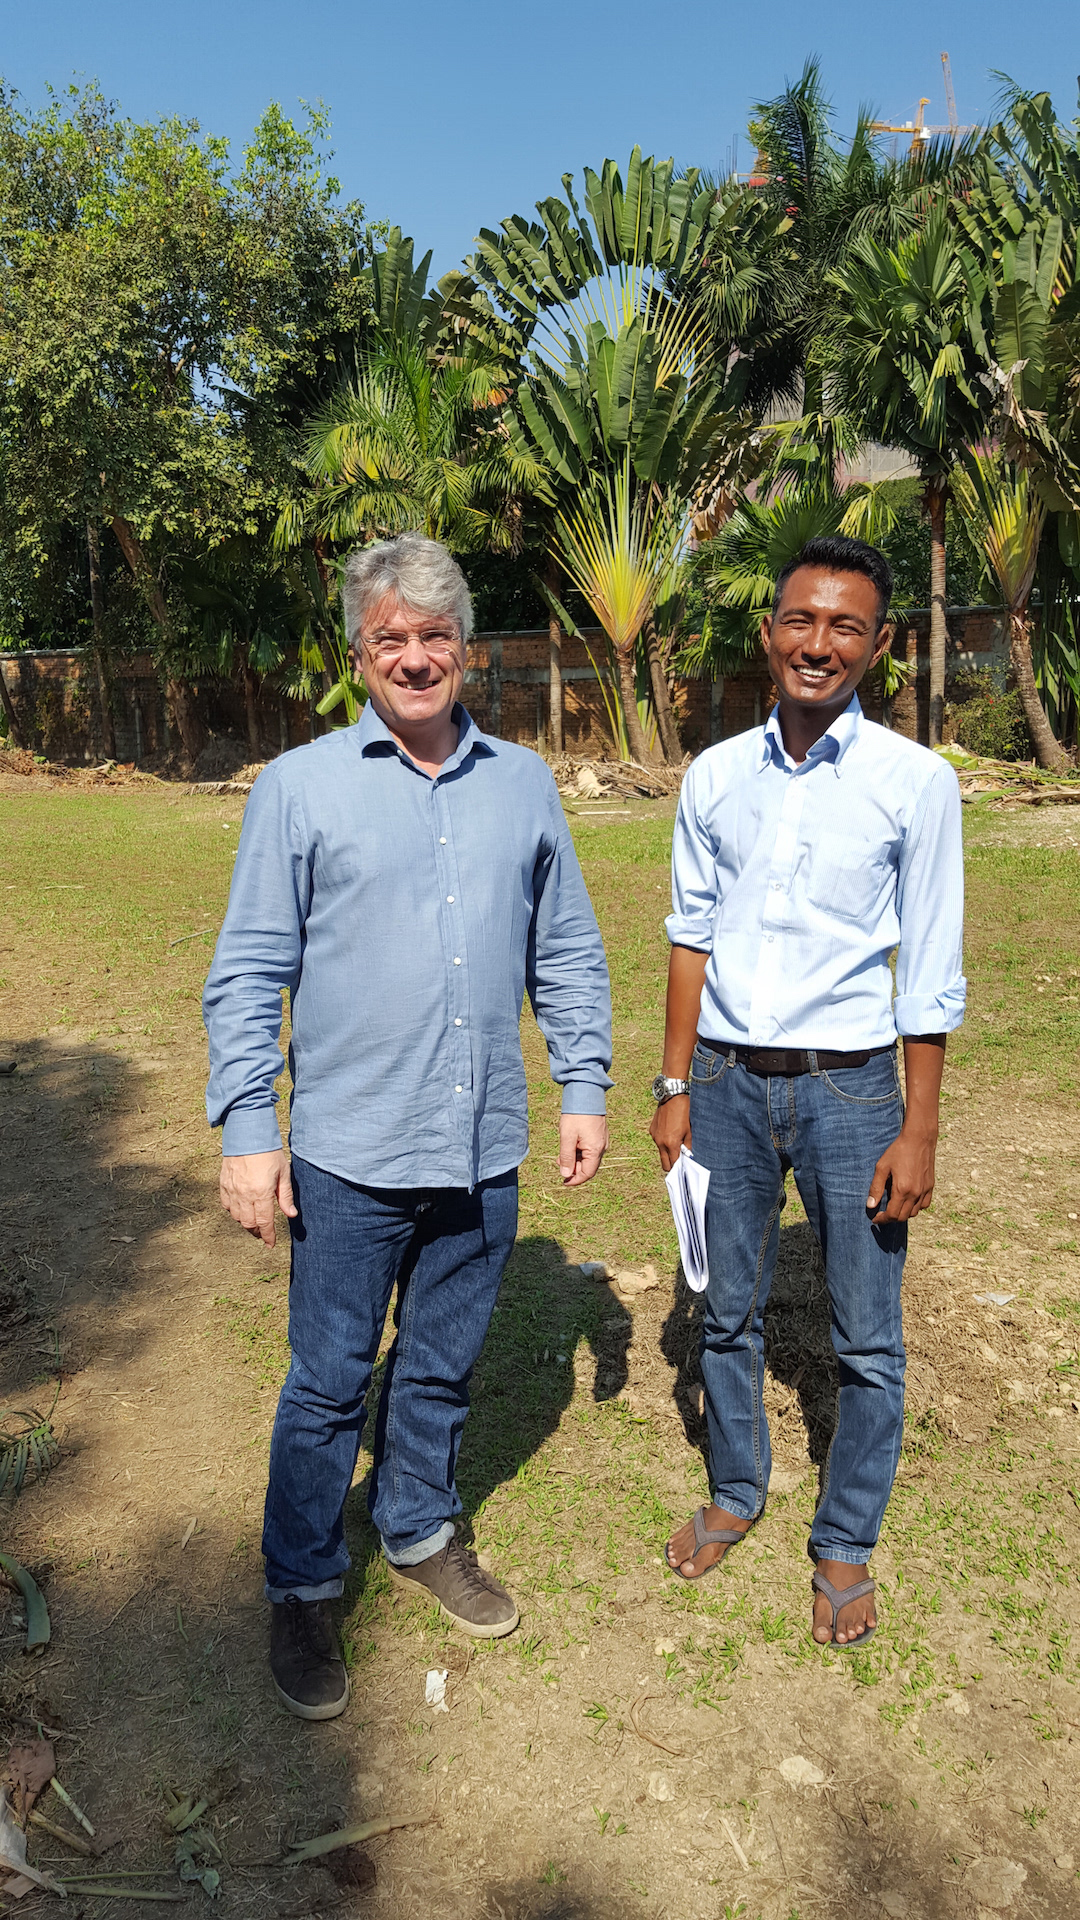 Chris Green and Mr Aung sorting out the garden concept on site.